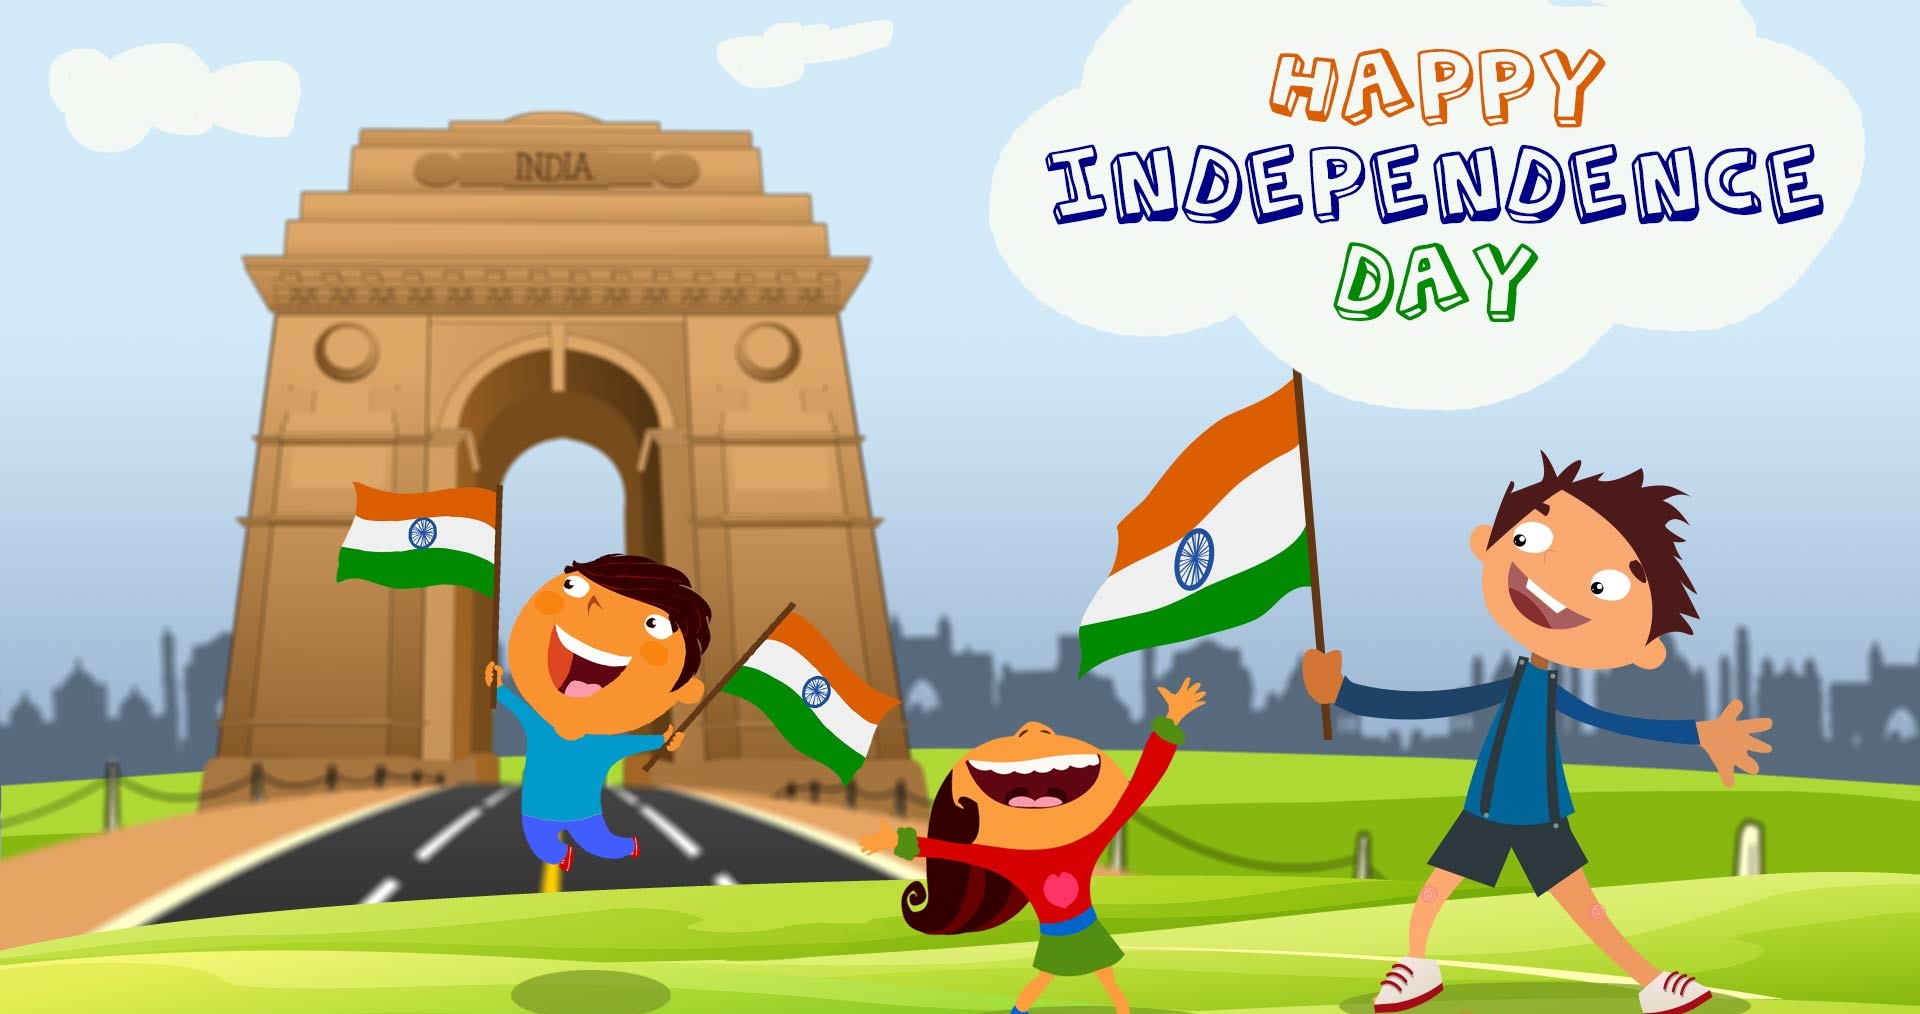 15 August (Independence Day) : Images | Speech | Patriotic Songs